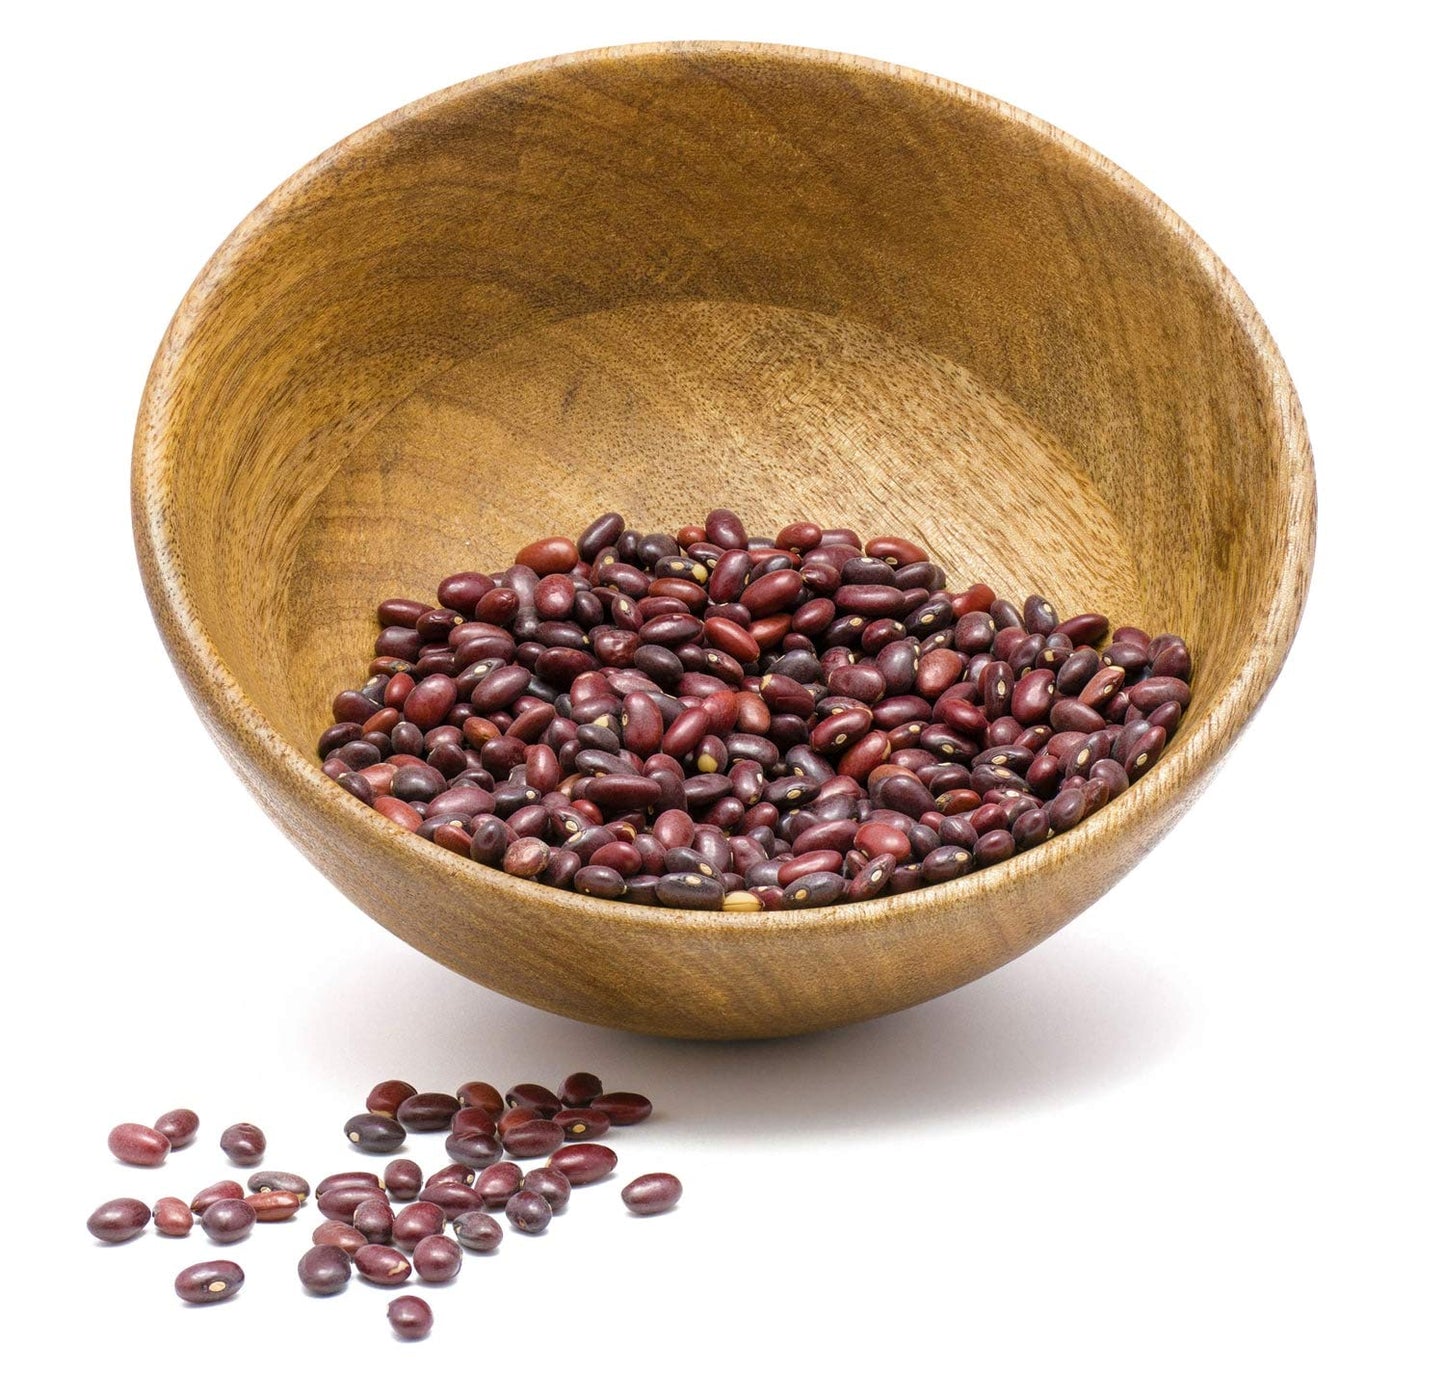 Organic Small Red Chili Beans - Non-GMO, Kosher, Vegan, Dry, Raw, Sproutable, Non-Irradiated, Vegan, Bulk - by Food to Live